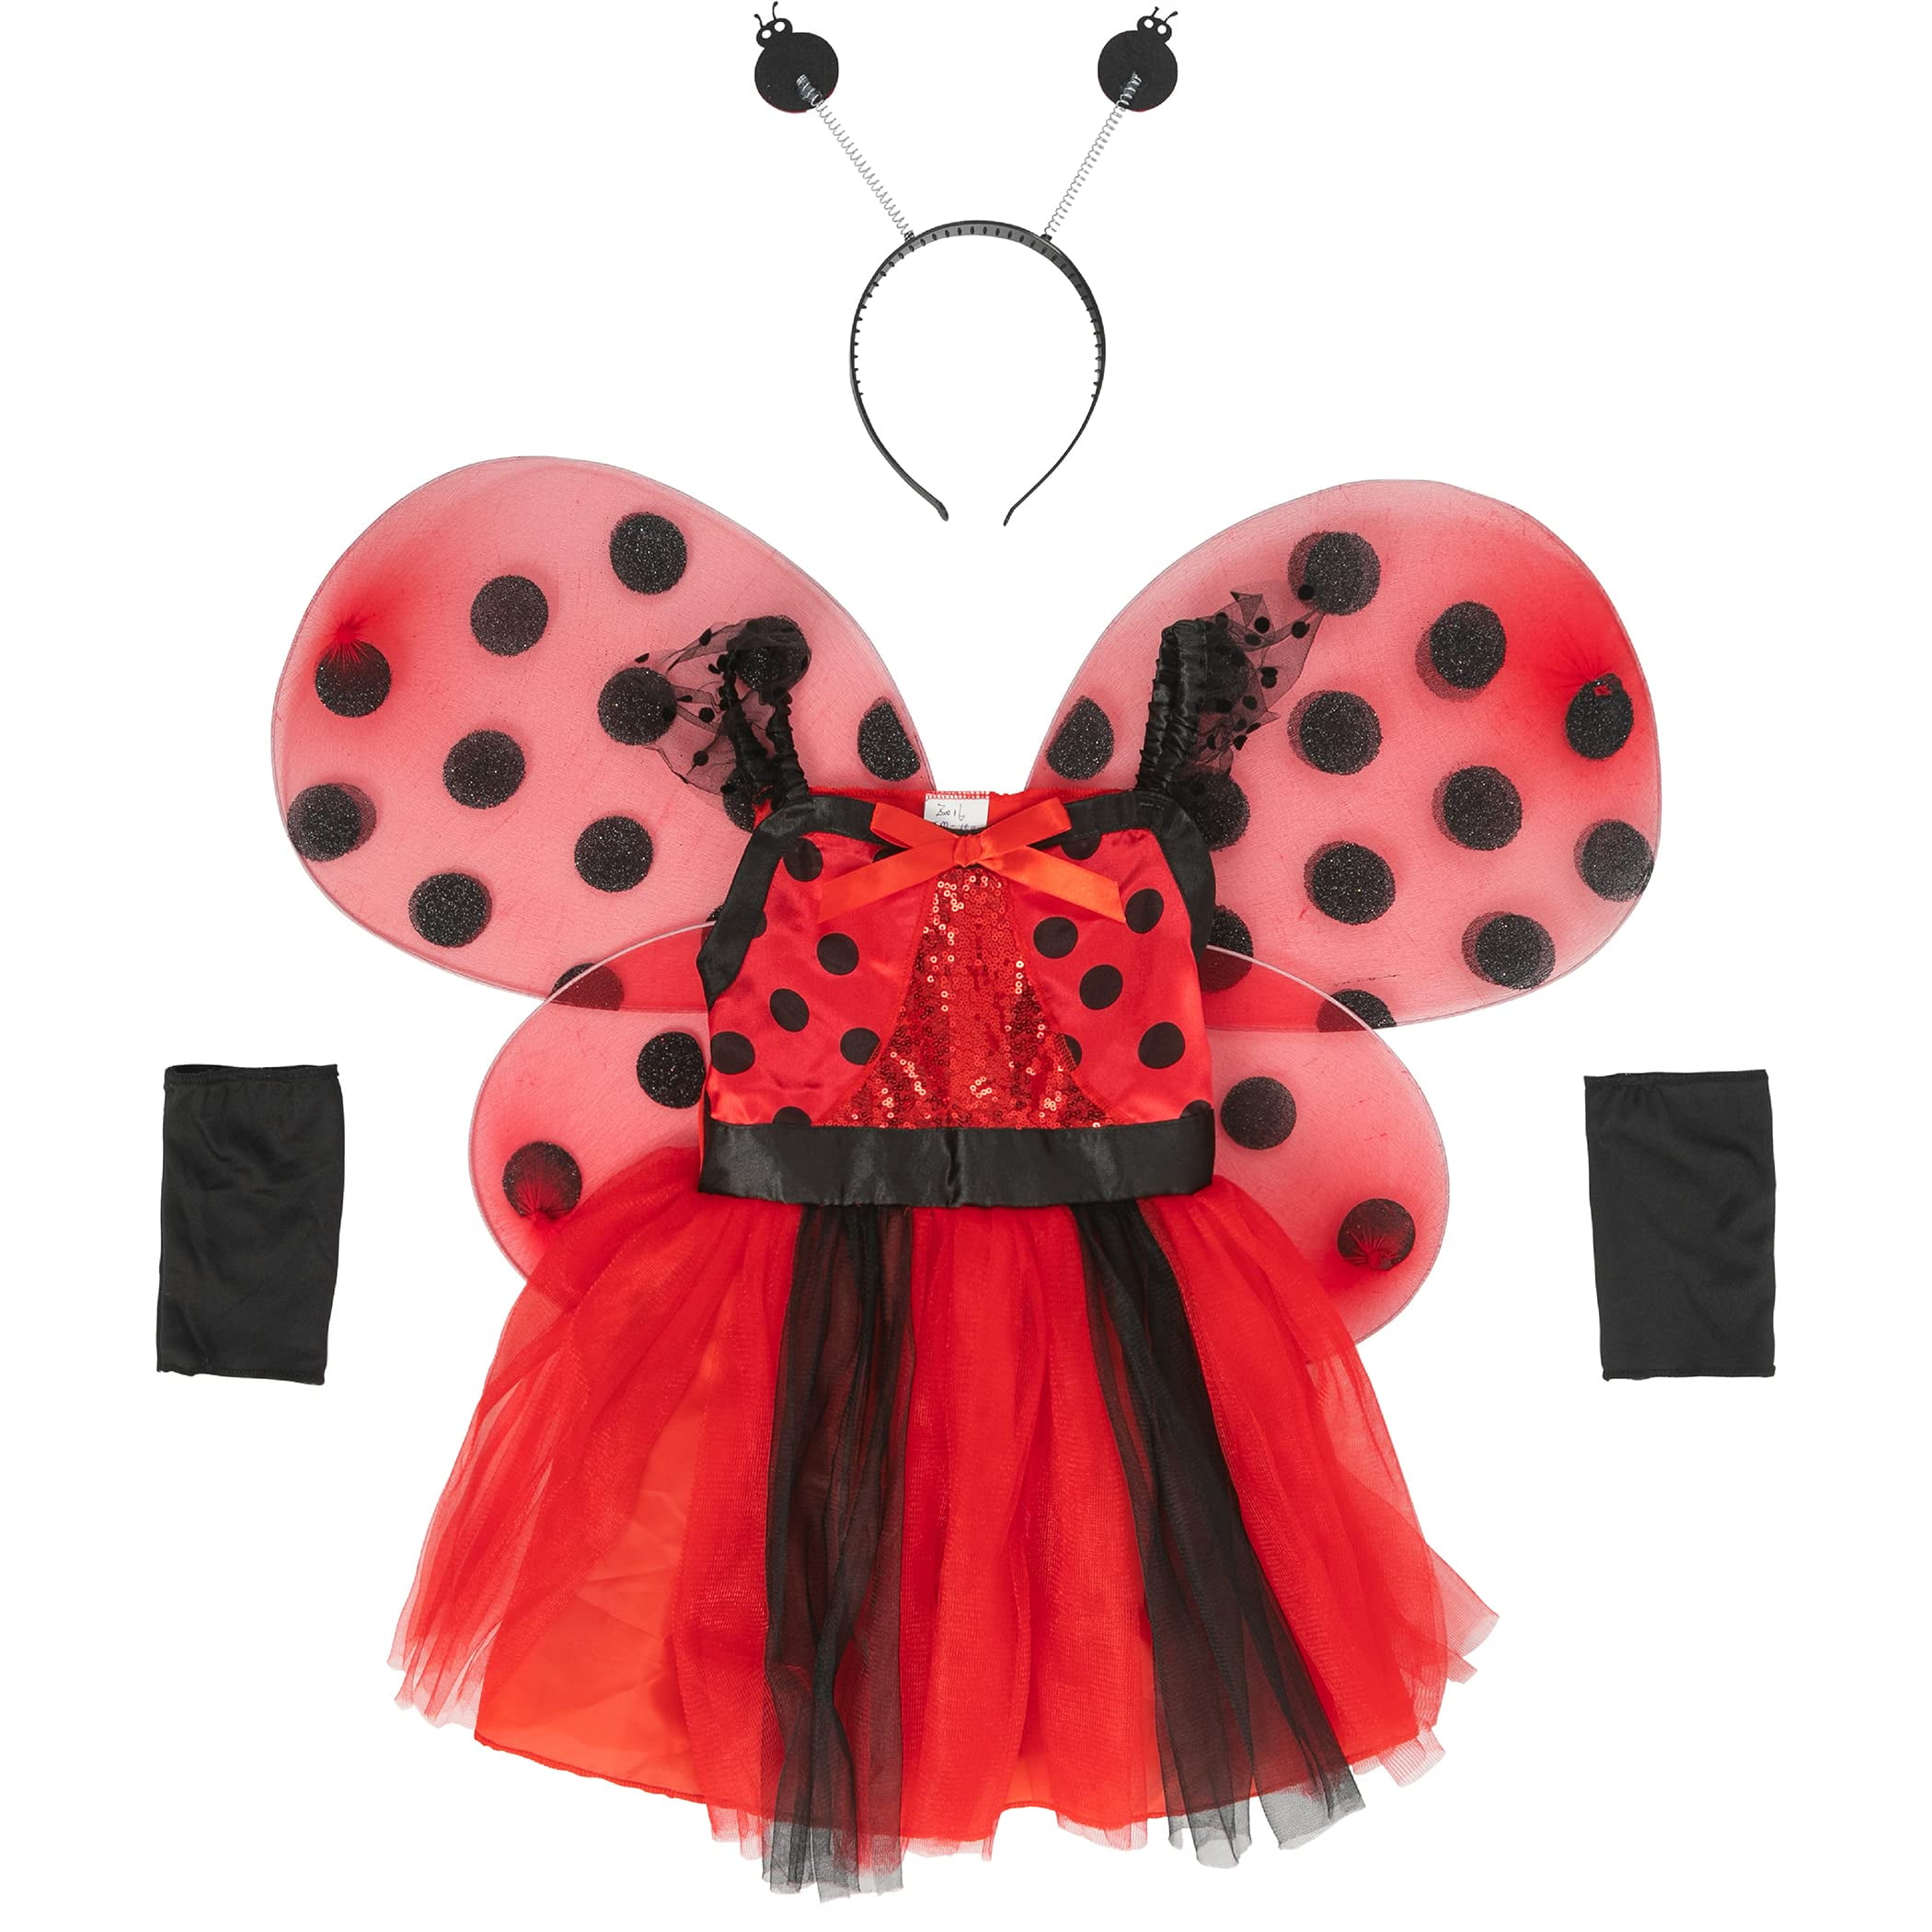  IKALI Girls Ladybug Costume, Deluxe Animal Fancy Dress Outfit  with Wings (10pcs Set) 3-4T : Clothing, Shoes & Jewelry